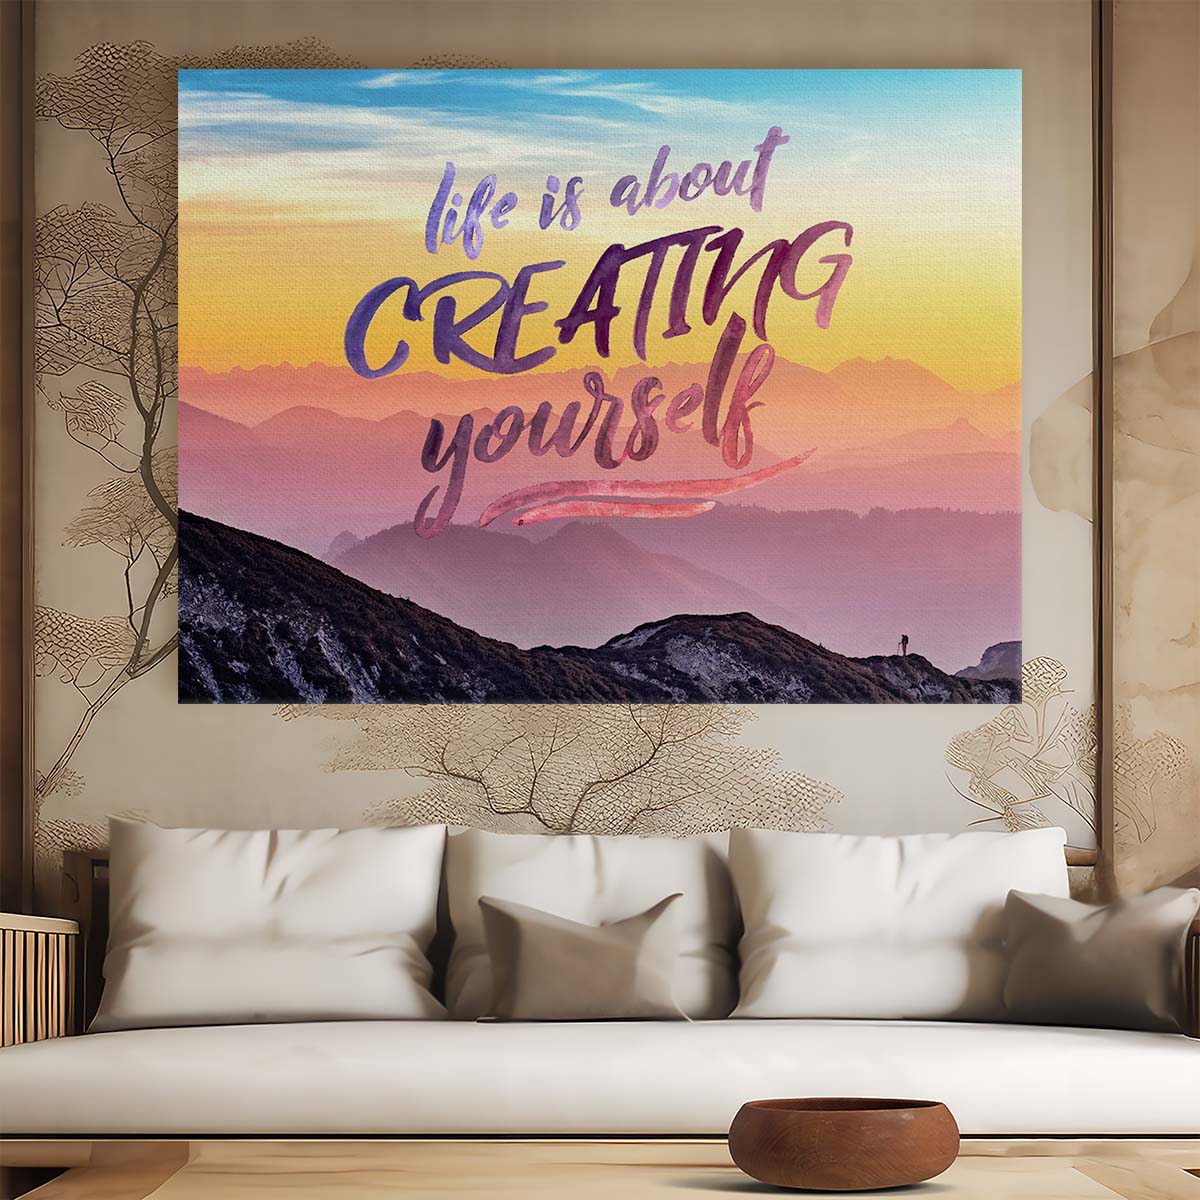 Life Is About Creating Yourself Wall Art by Luxuriance Designs. Made in USA.